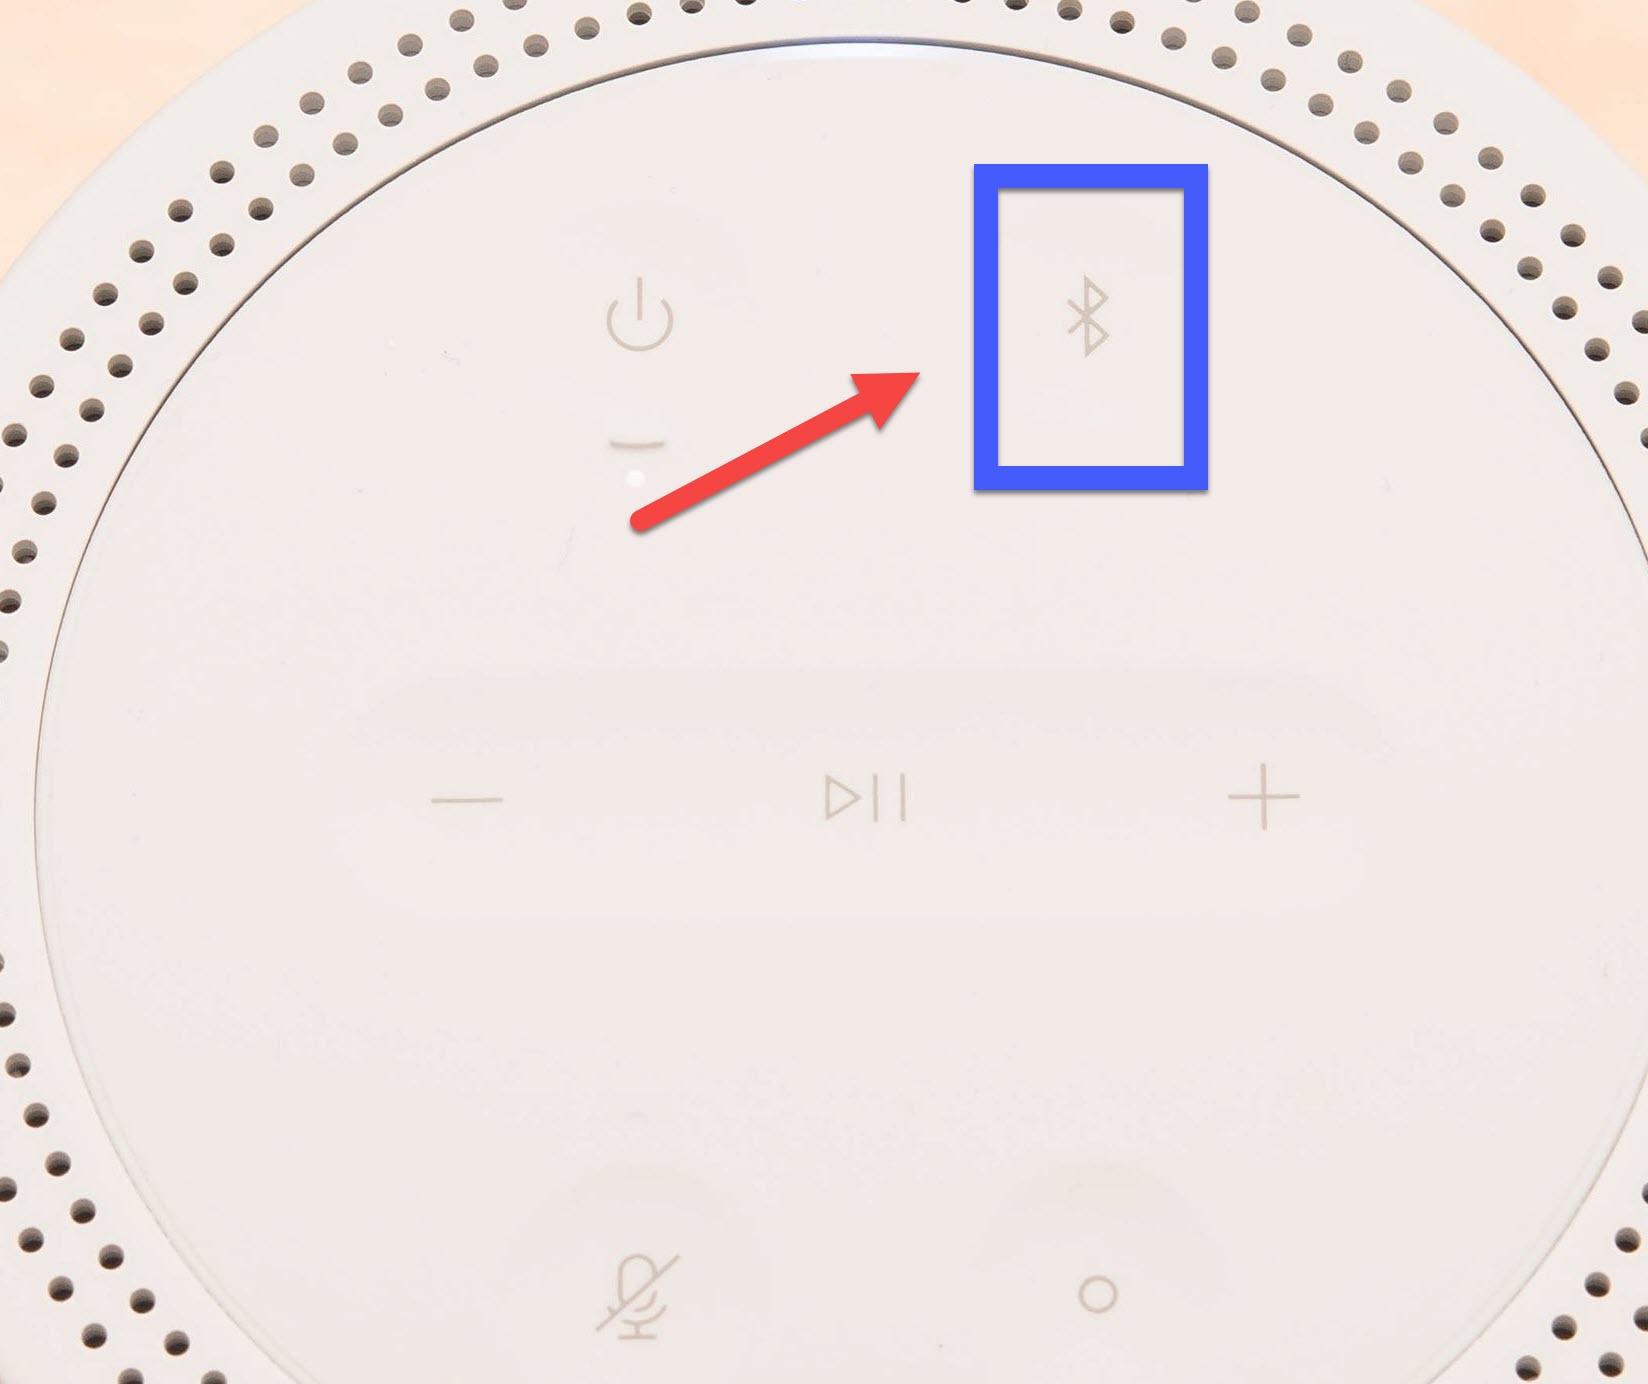 Speaker Cannot Connect to a Bluetooth Device